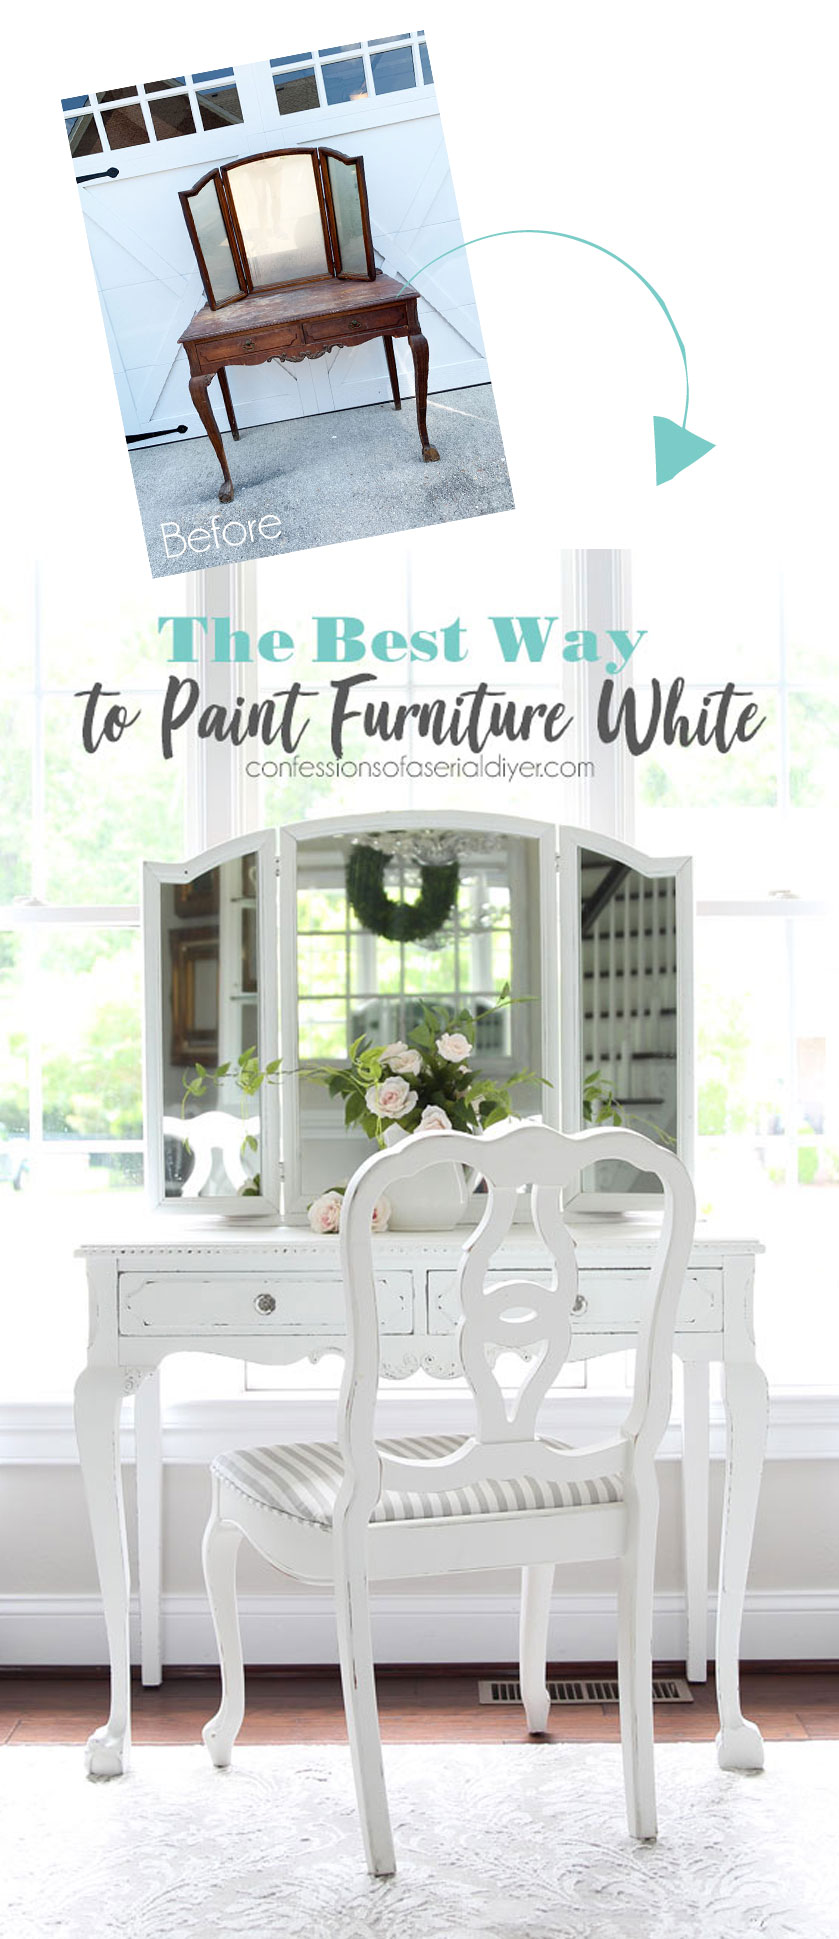 The Best Way to Paint Furniture White